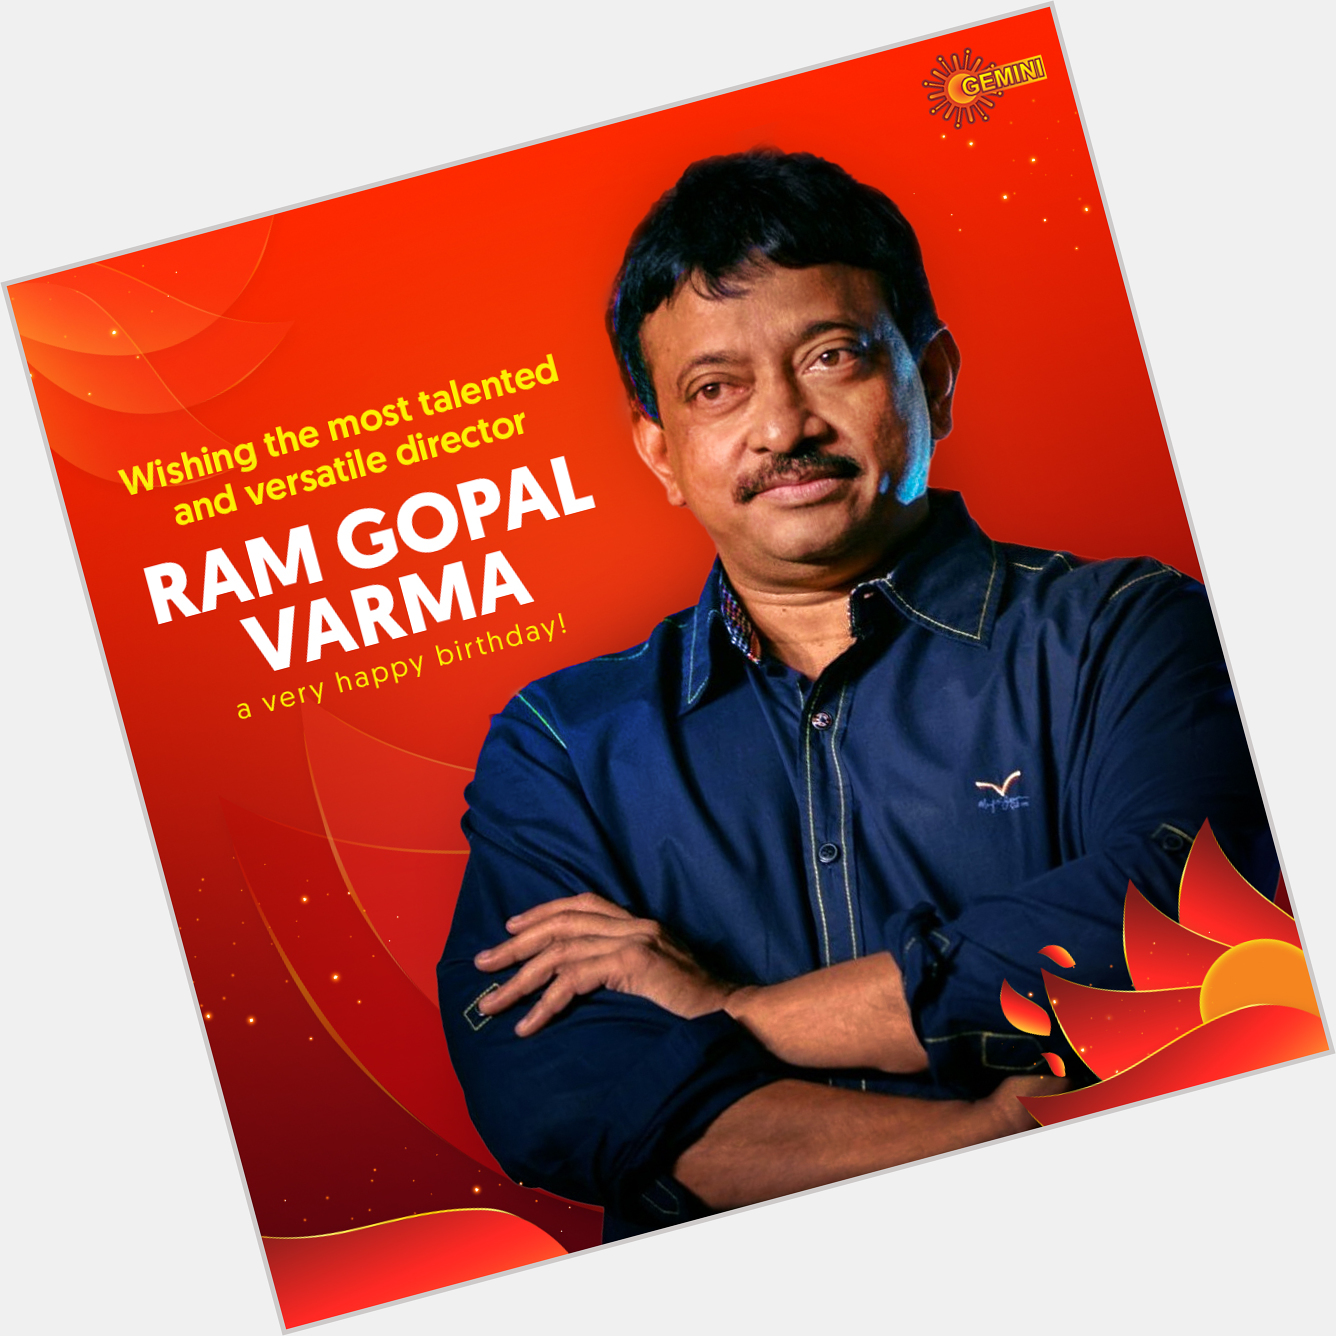 Wishing the most talented and versatile director Ram Gopal Varma a very happy birthday !  